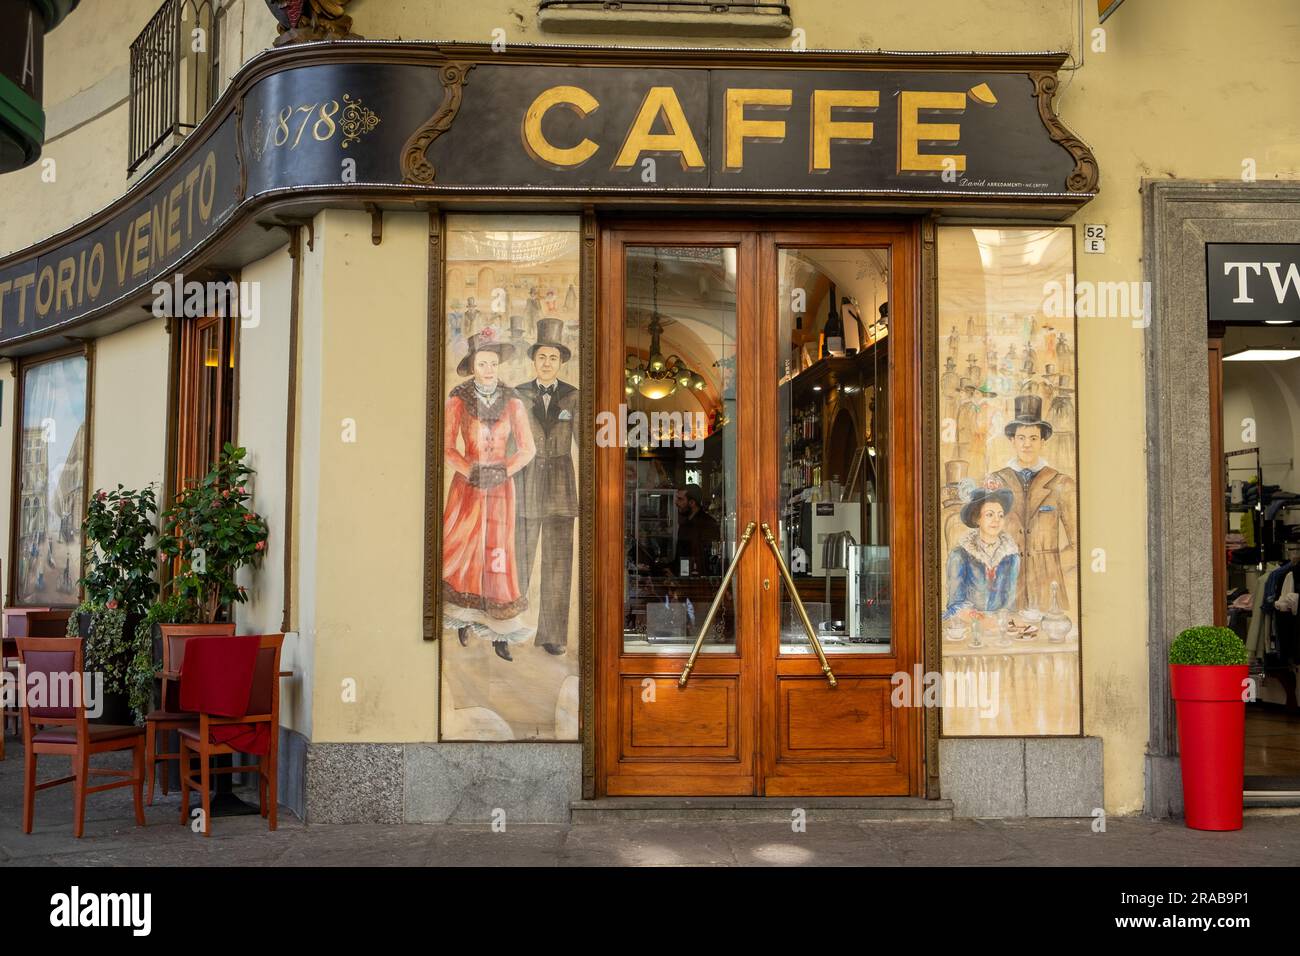 Cafe Vittorio Veneto opened in 1878 with paintings and outdoor seating, Turin, Italy Stock Photo